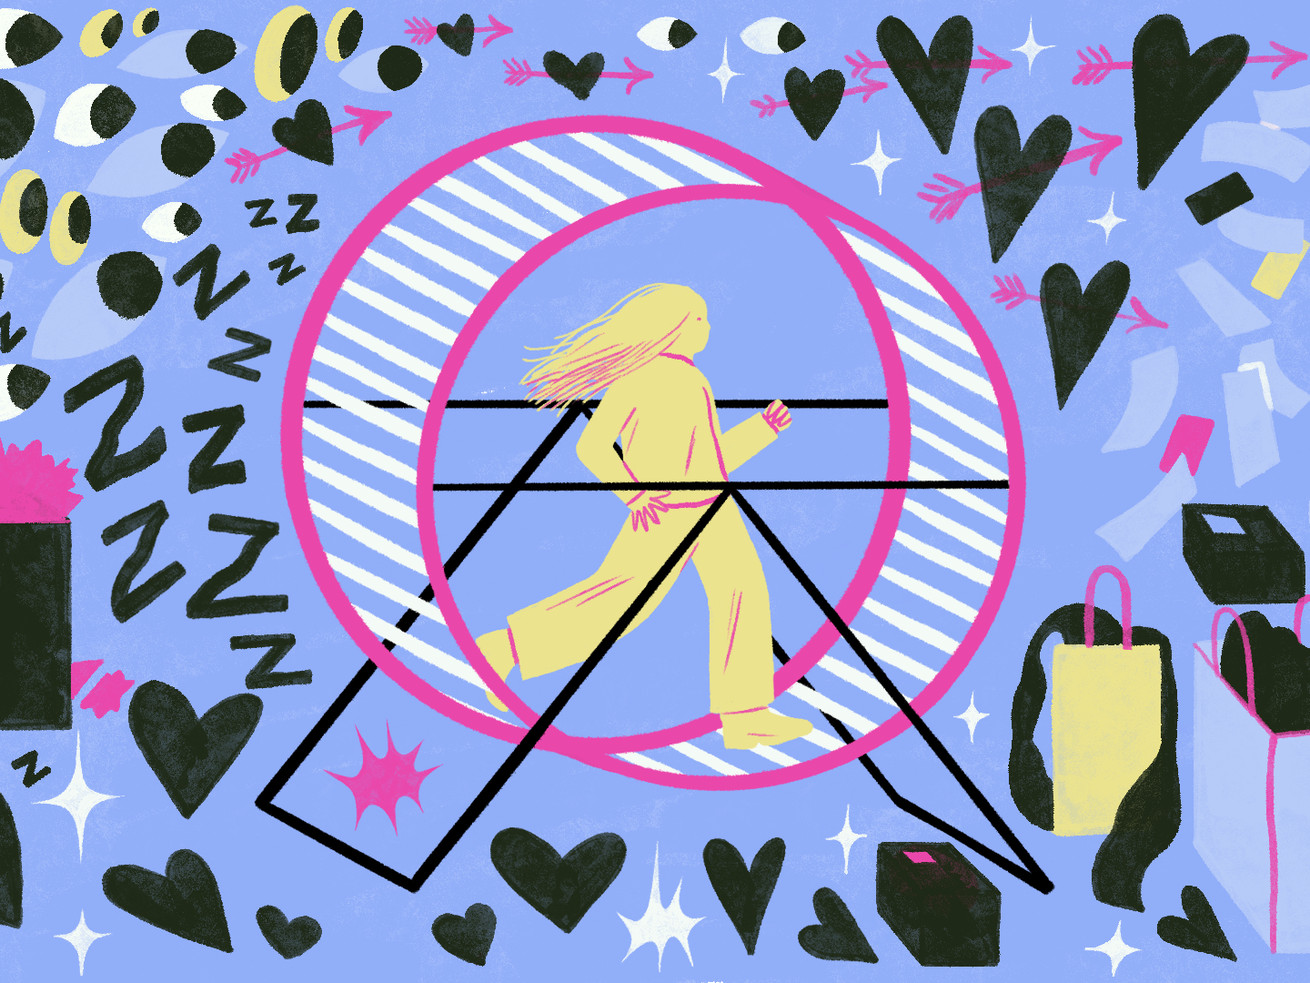 An illustration shows a woman running on a hamster wheel. She’s surrounded by a cycle of eyeballs, hearts with arrows, falling money, shopping bags, overflowing trash cans, and Zs.